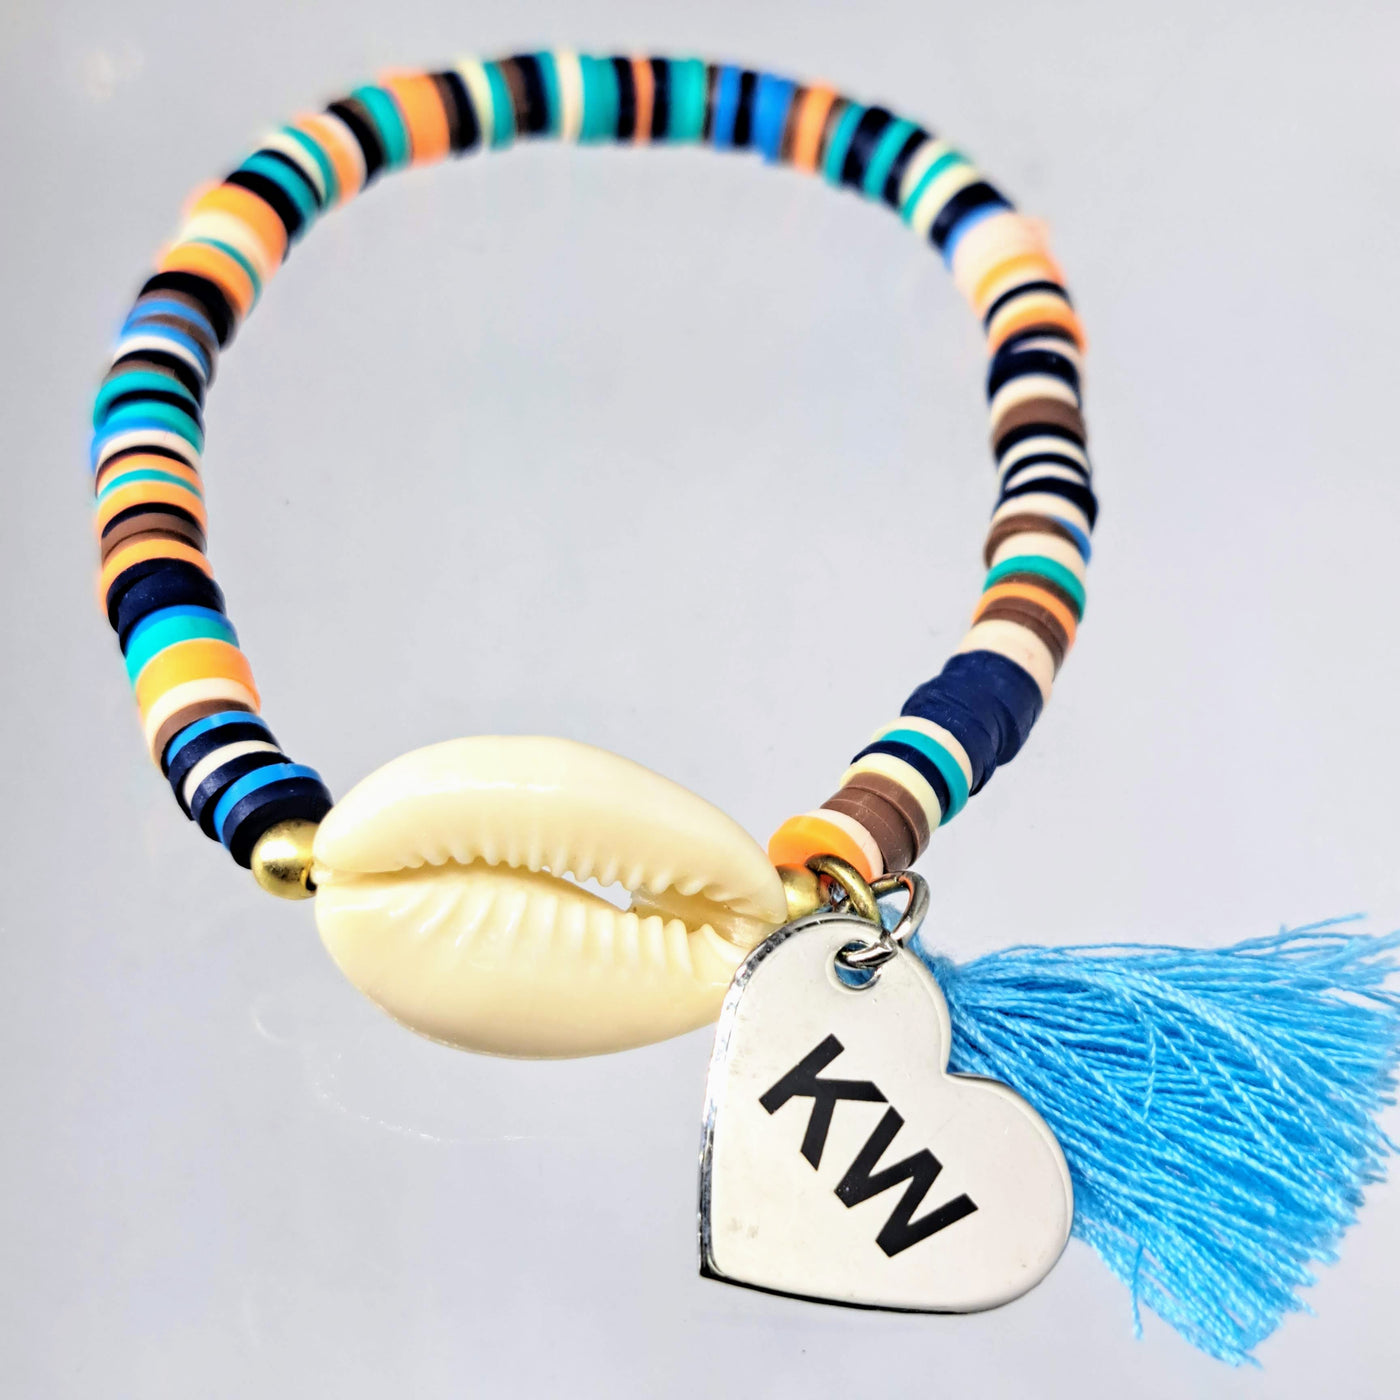 "I Heart KW" Bracelet - Cowrie Shell, Recycled Disks, Stainless Charm